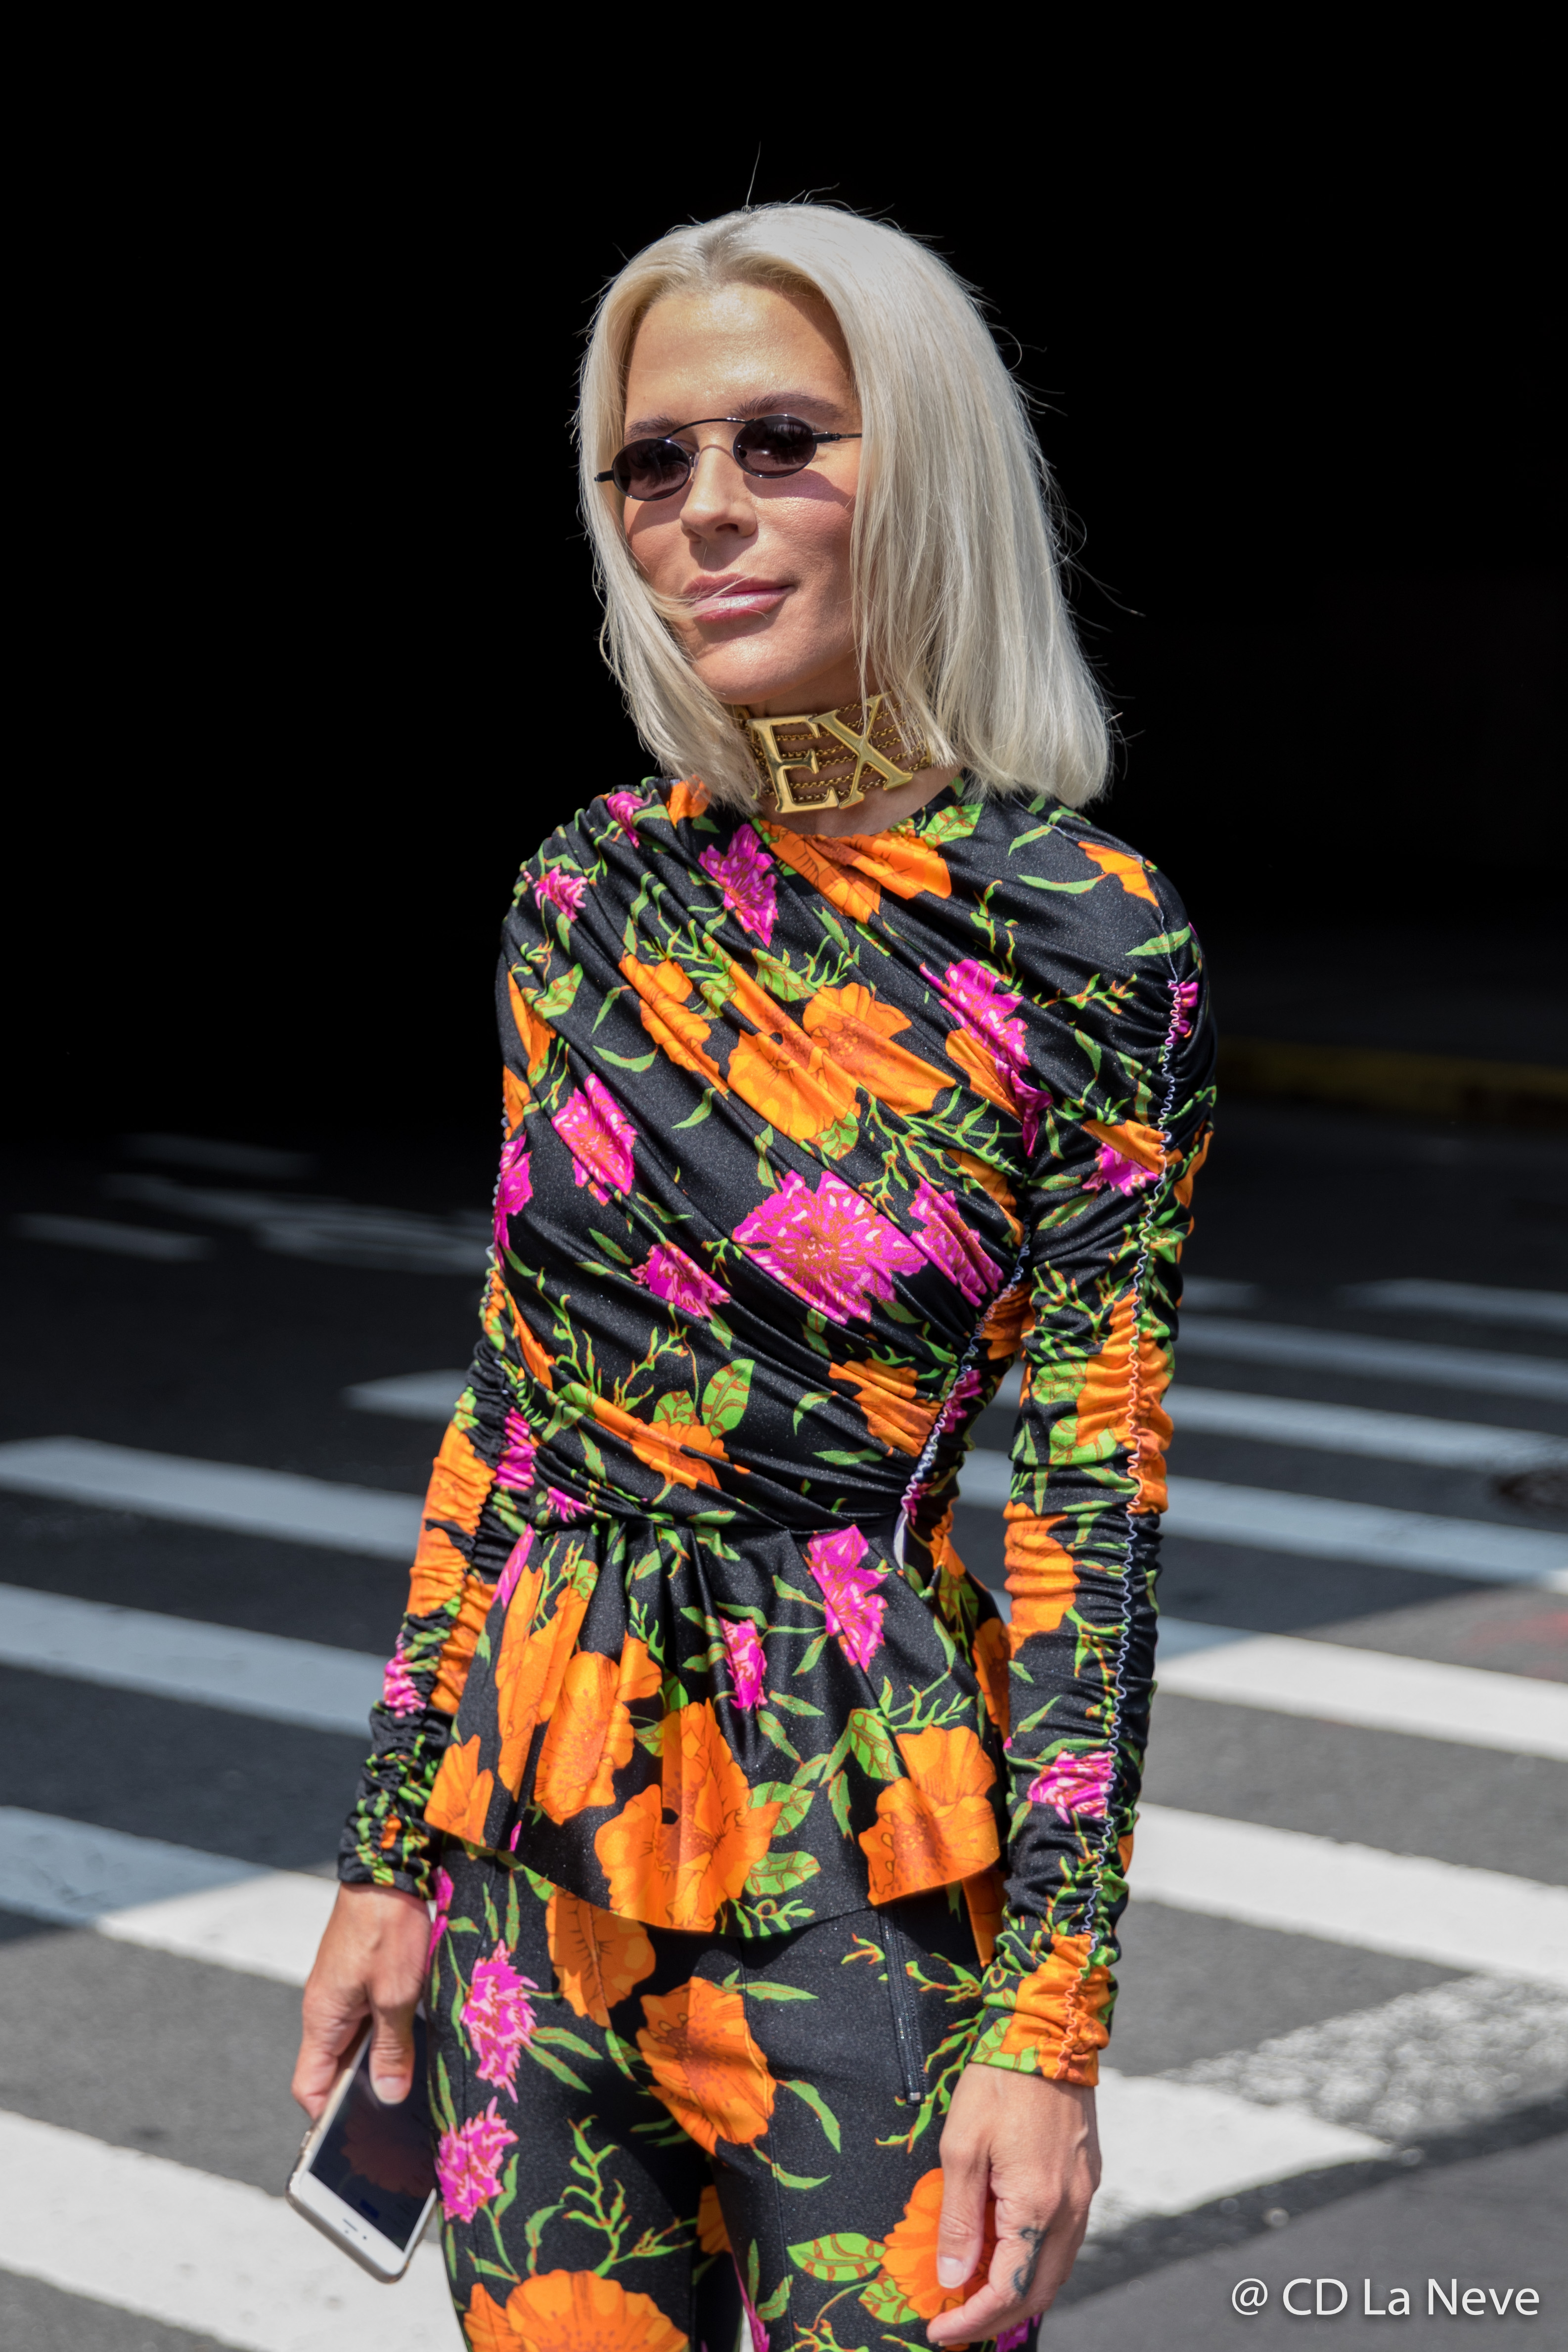 Brock Collection New York Fashion Week NYFW SS18 Street Style